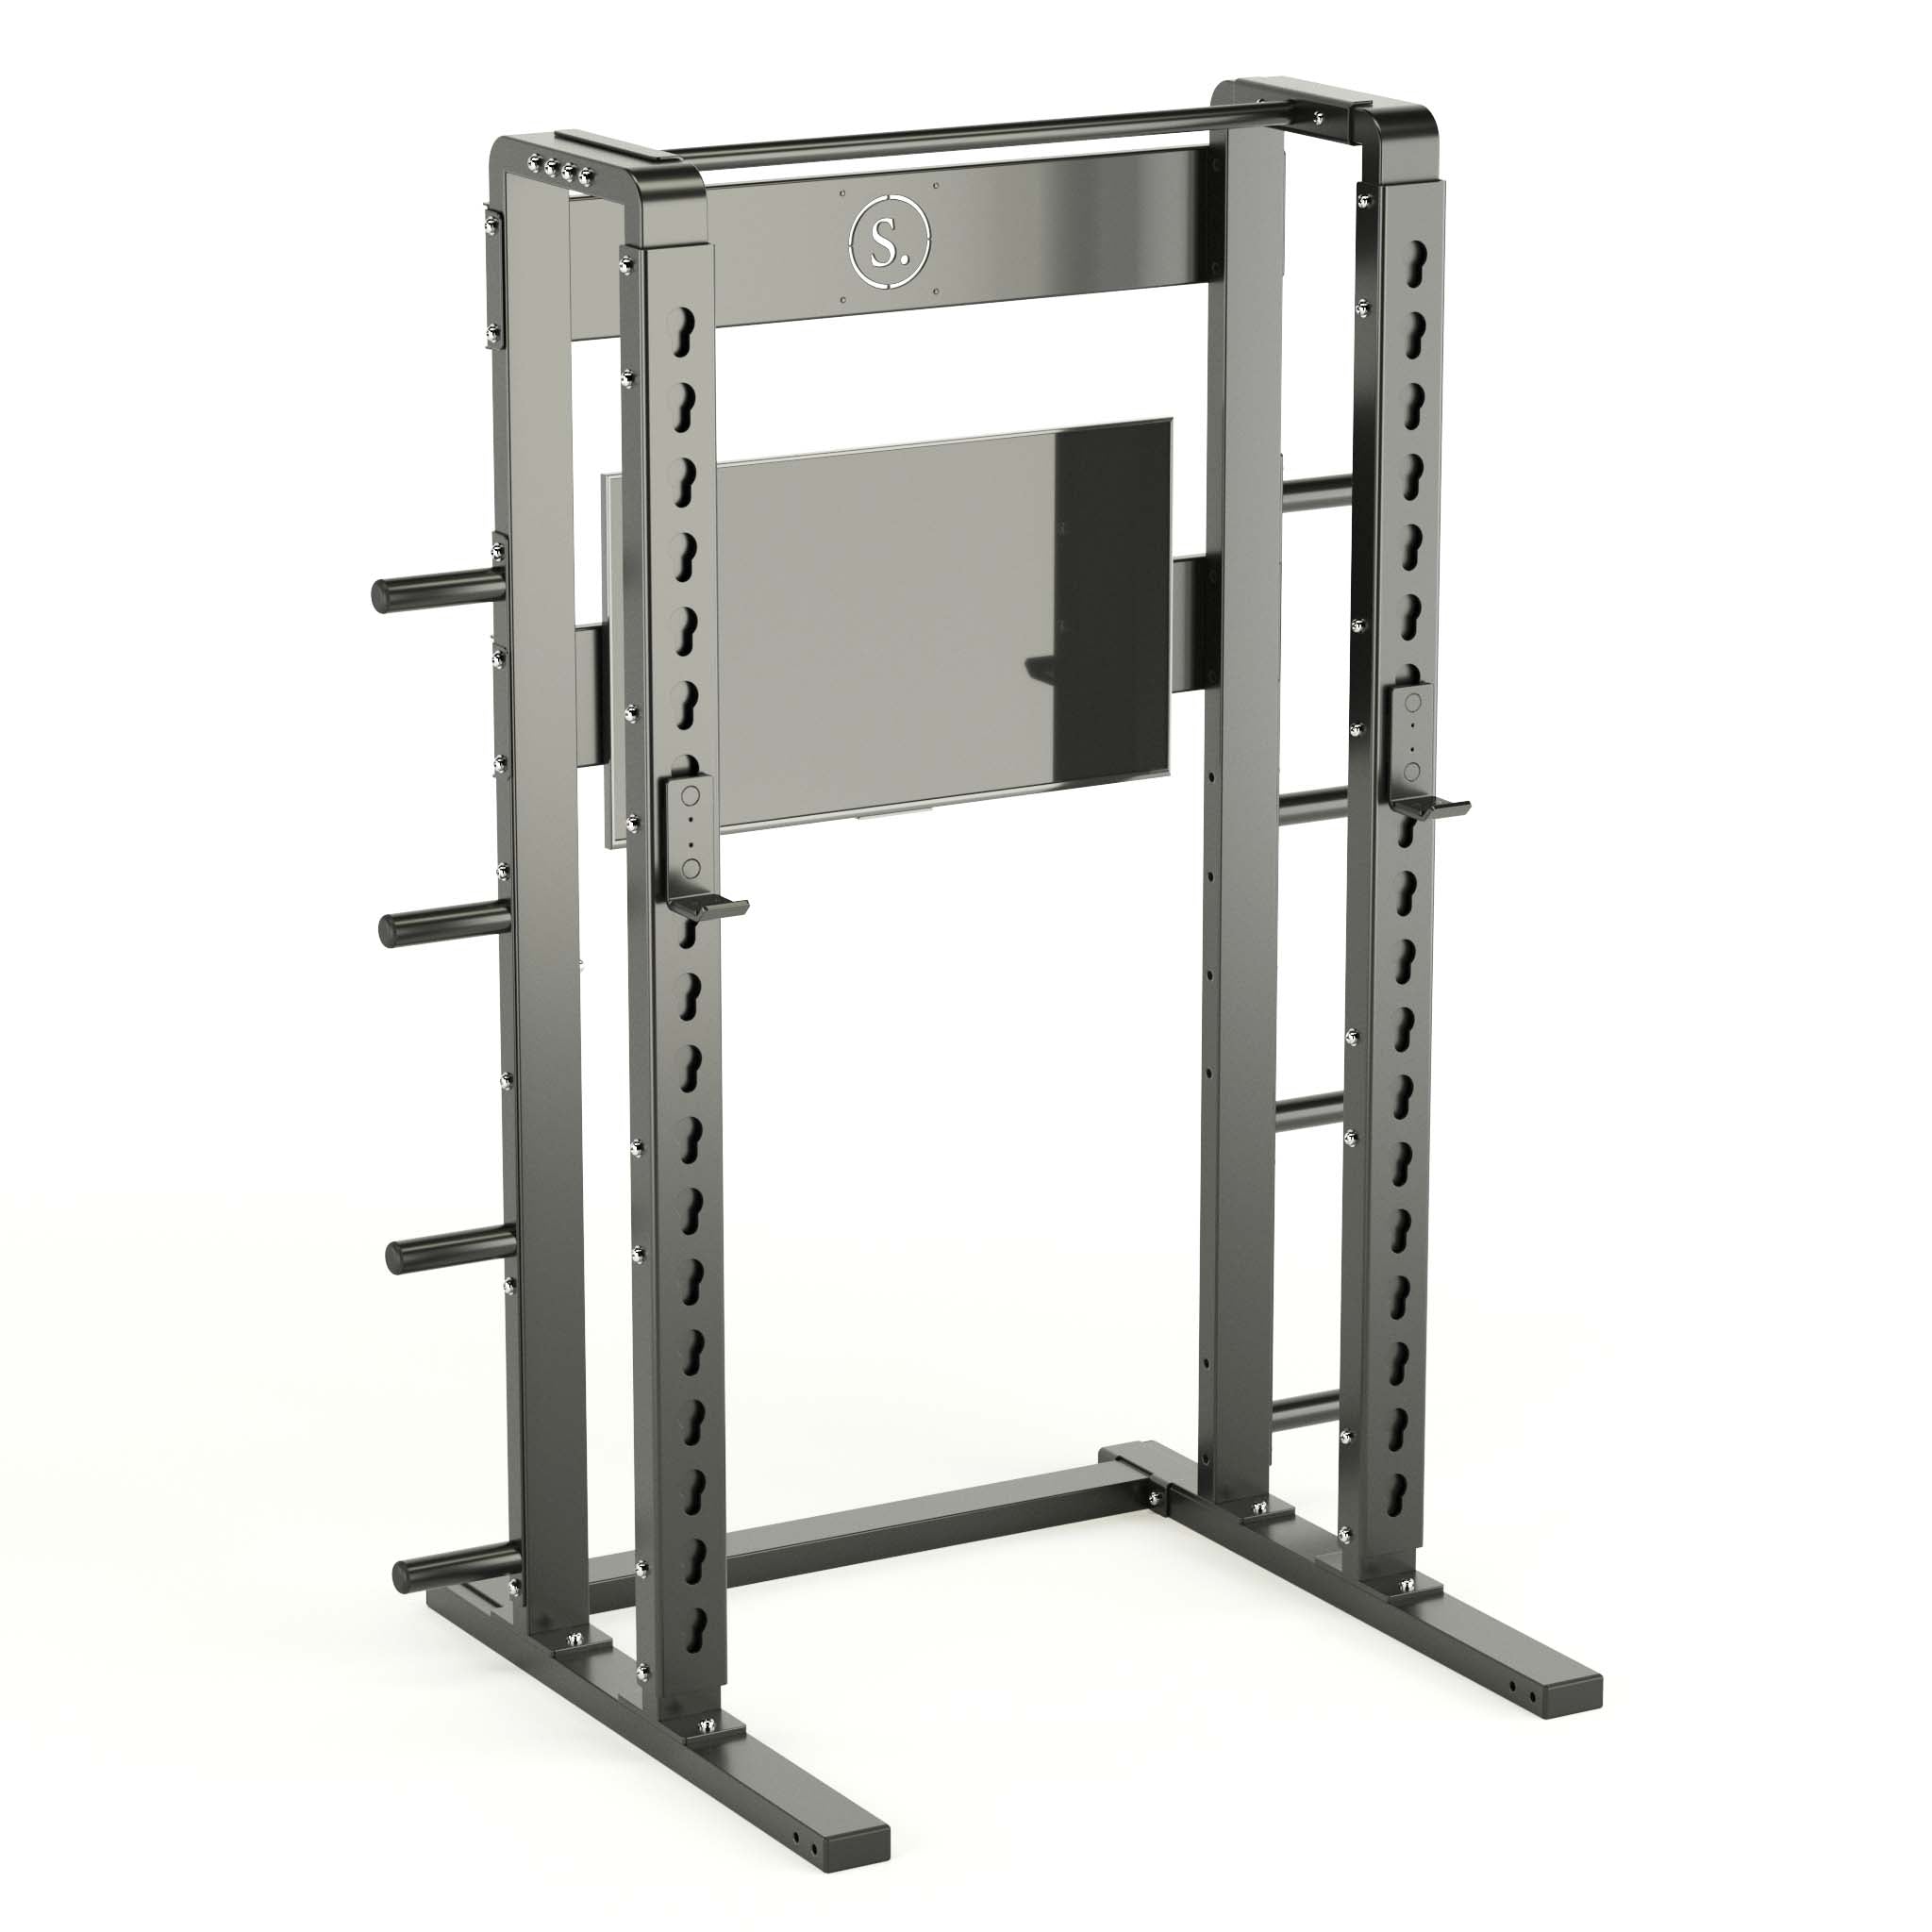 Solo Squat Rack Plus with weight horns in black